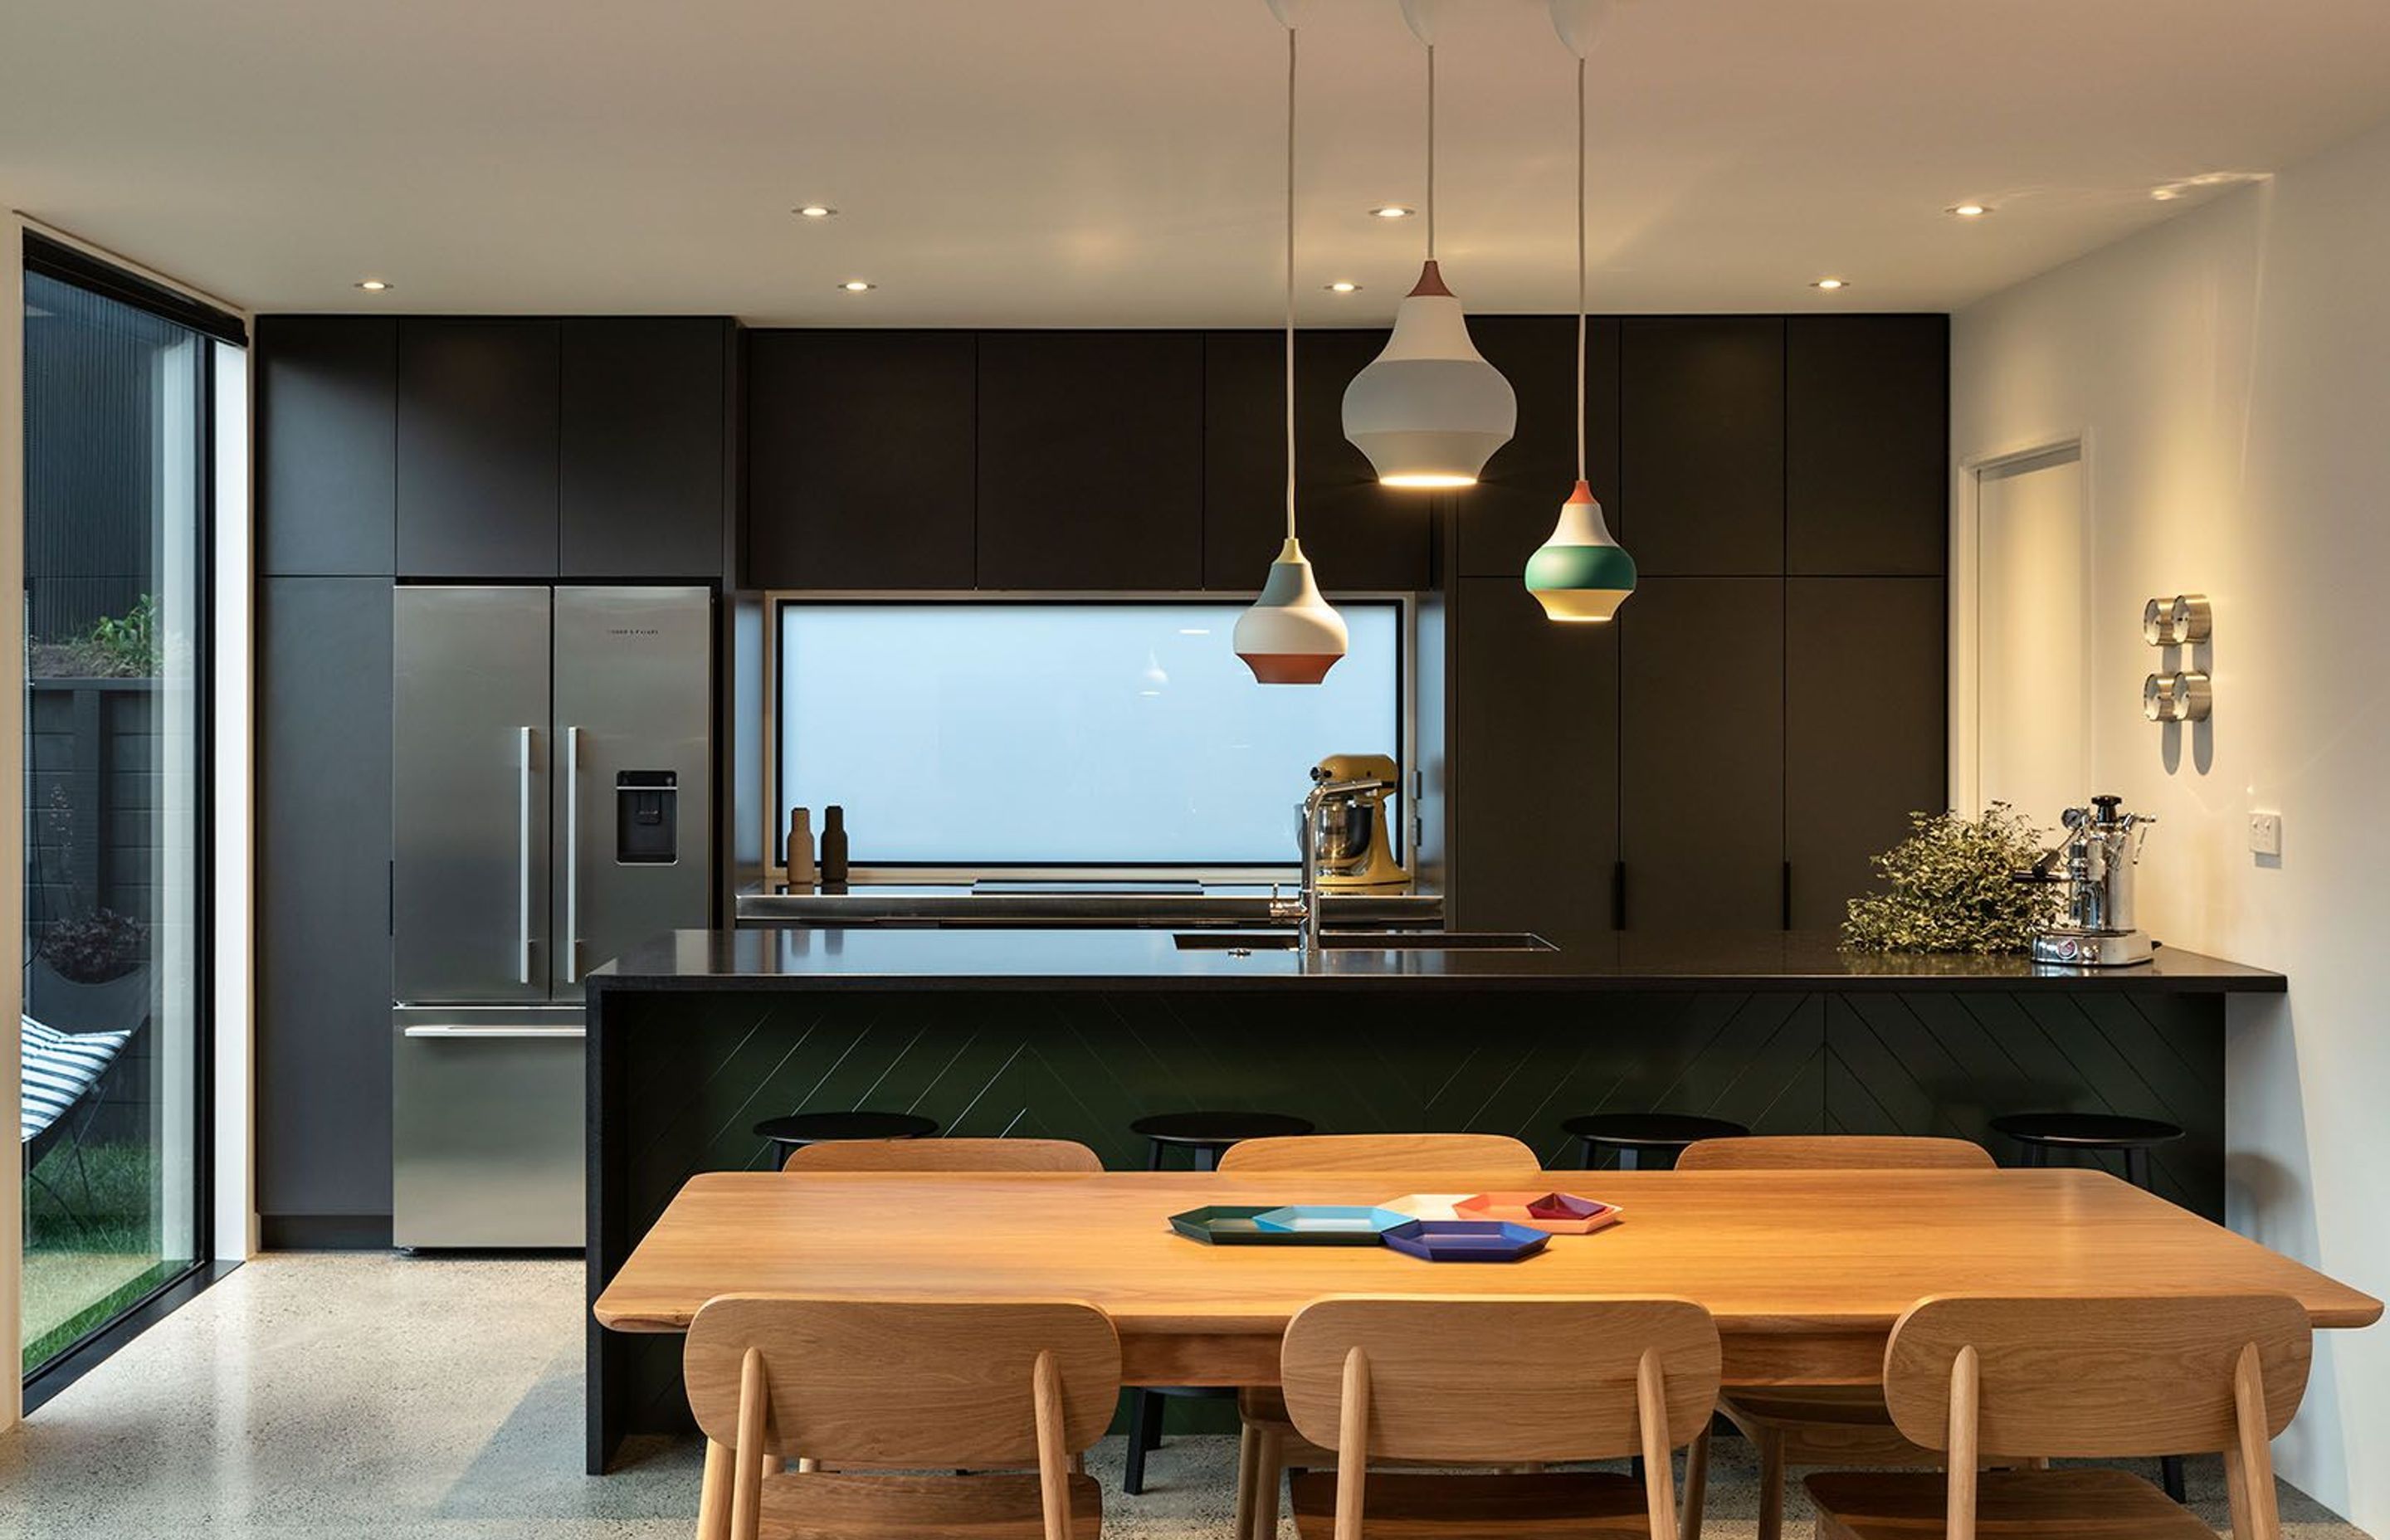 A dark green and grey kitchen draws on Blackbird's dark exterior, providing a contrast to the polished concrete flooring and timber table and chairs.